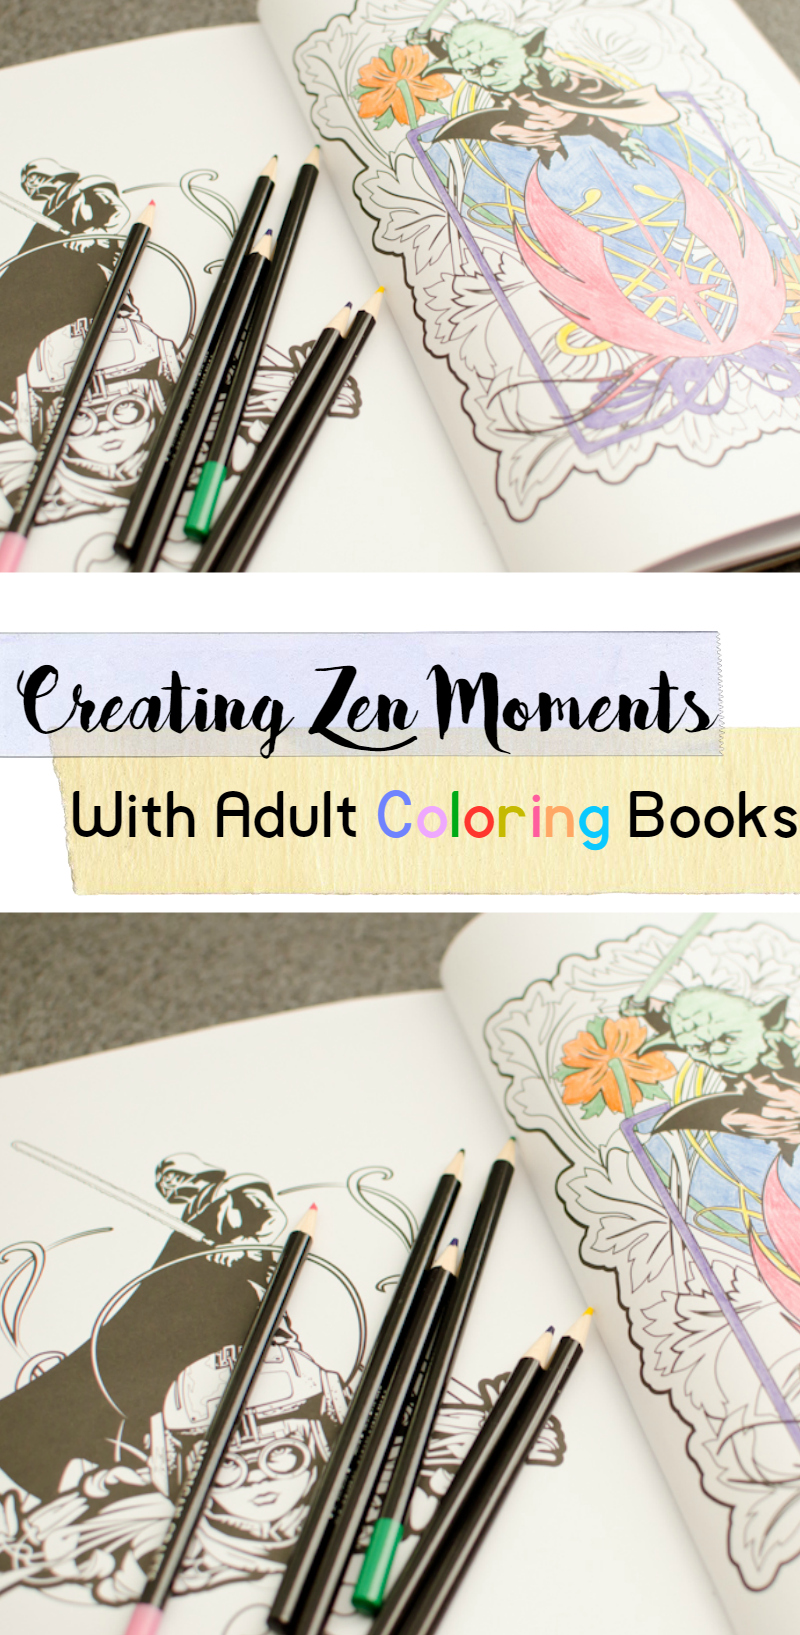 Creating Zen Moments With Adult Coloring Books